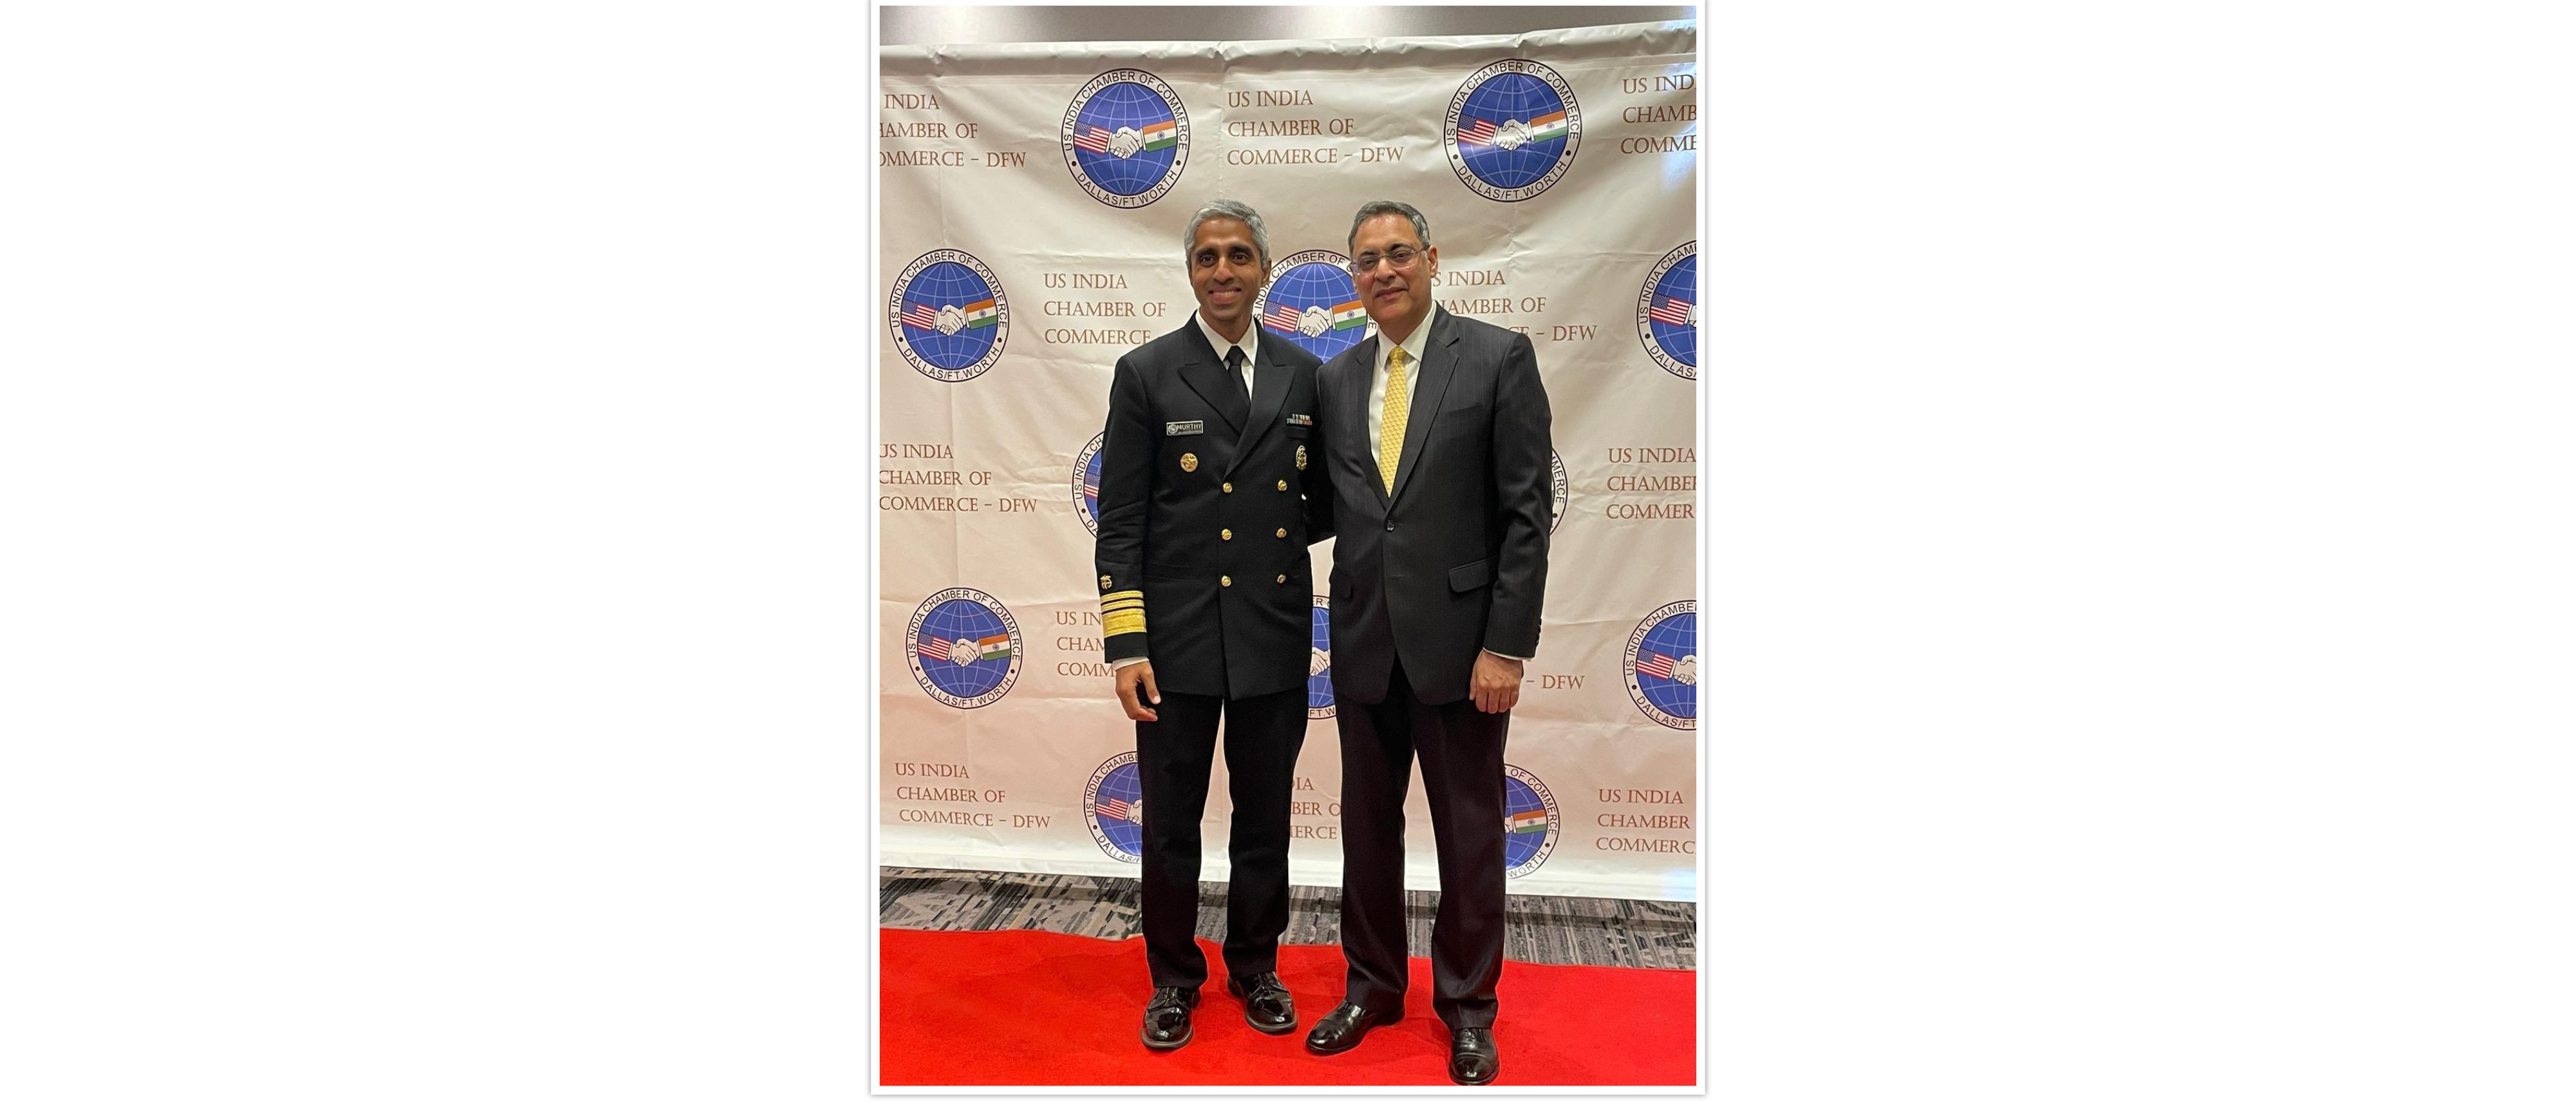  Consul General met Surgeon General  Vivek Murthy at the  ‘Wellness and Workplace Conference’ organized by the US India Chamber of Commerce, Dallas Fort Worth on September 23,2022